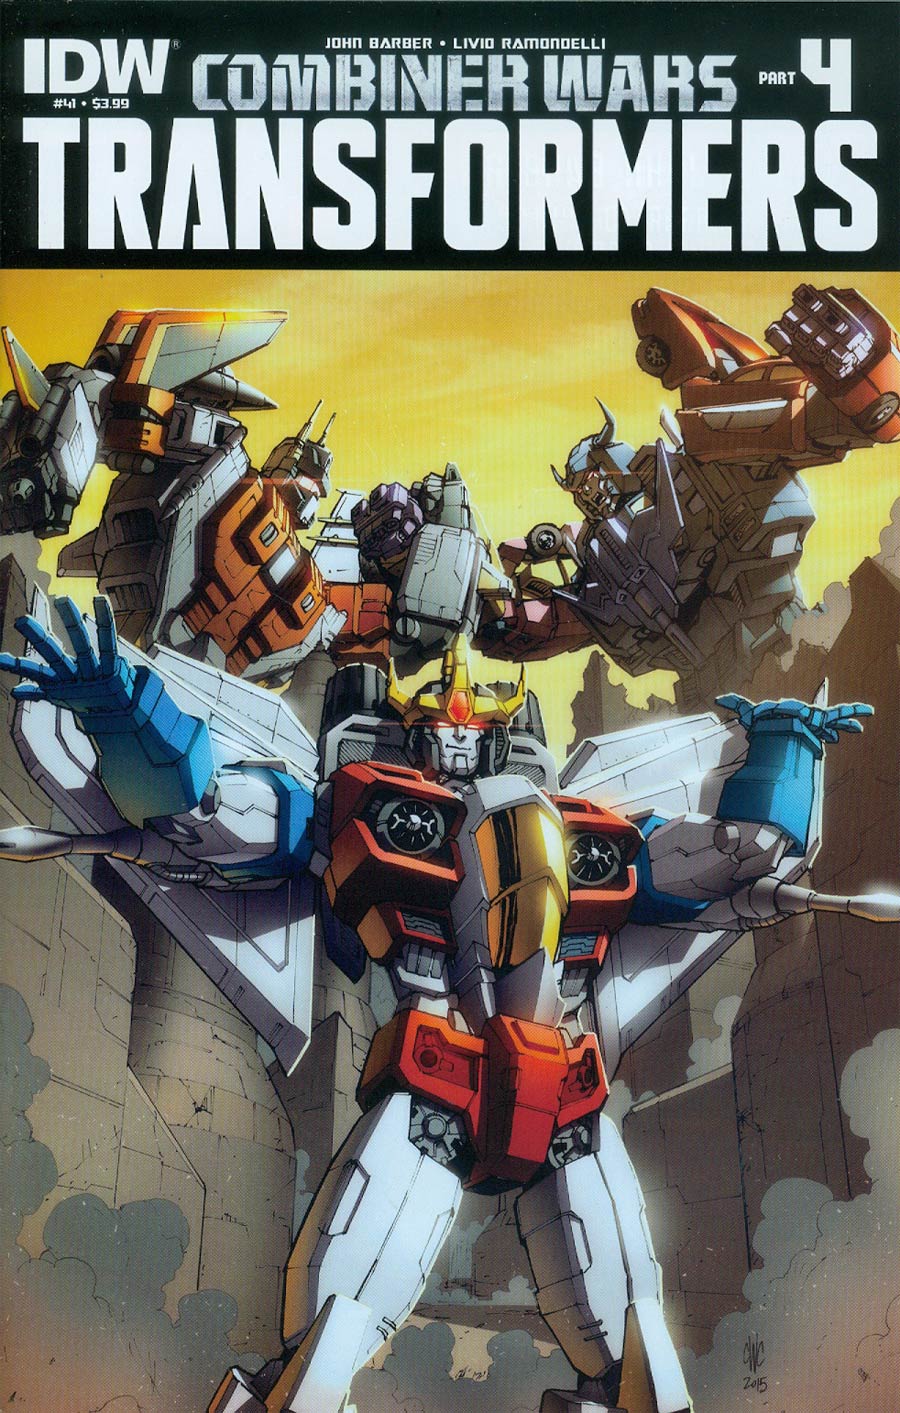 Transformers Vol 3 #41 Cover A Regular Casey W Coller Cover (Combiner Wars Part 4)